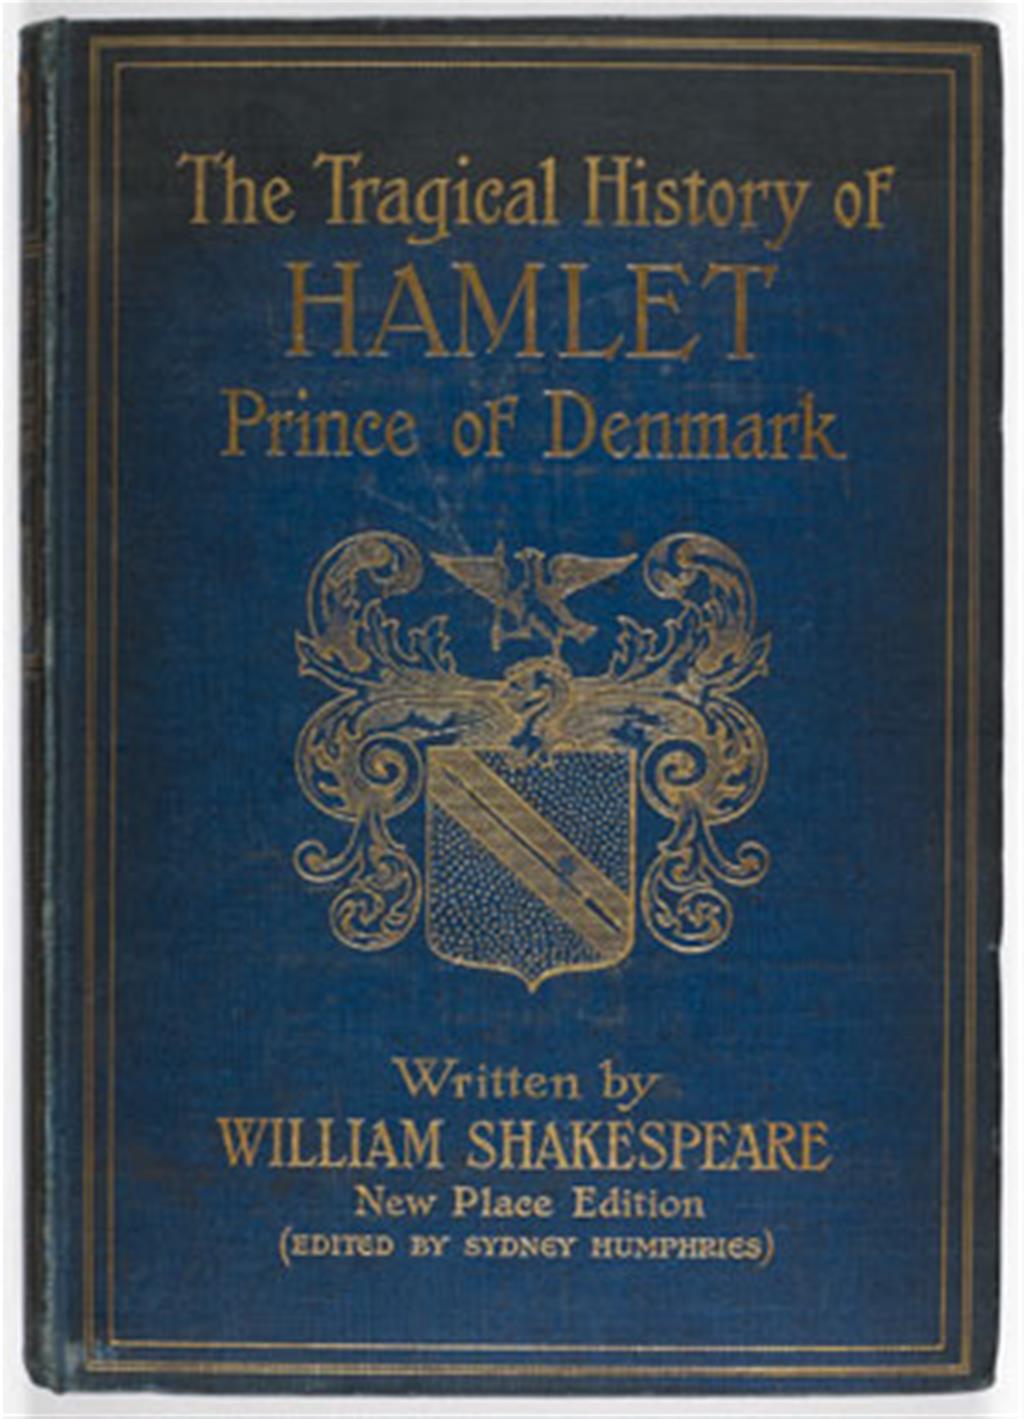 The Tragical History of Hamlet cover image